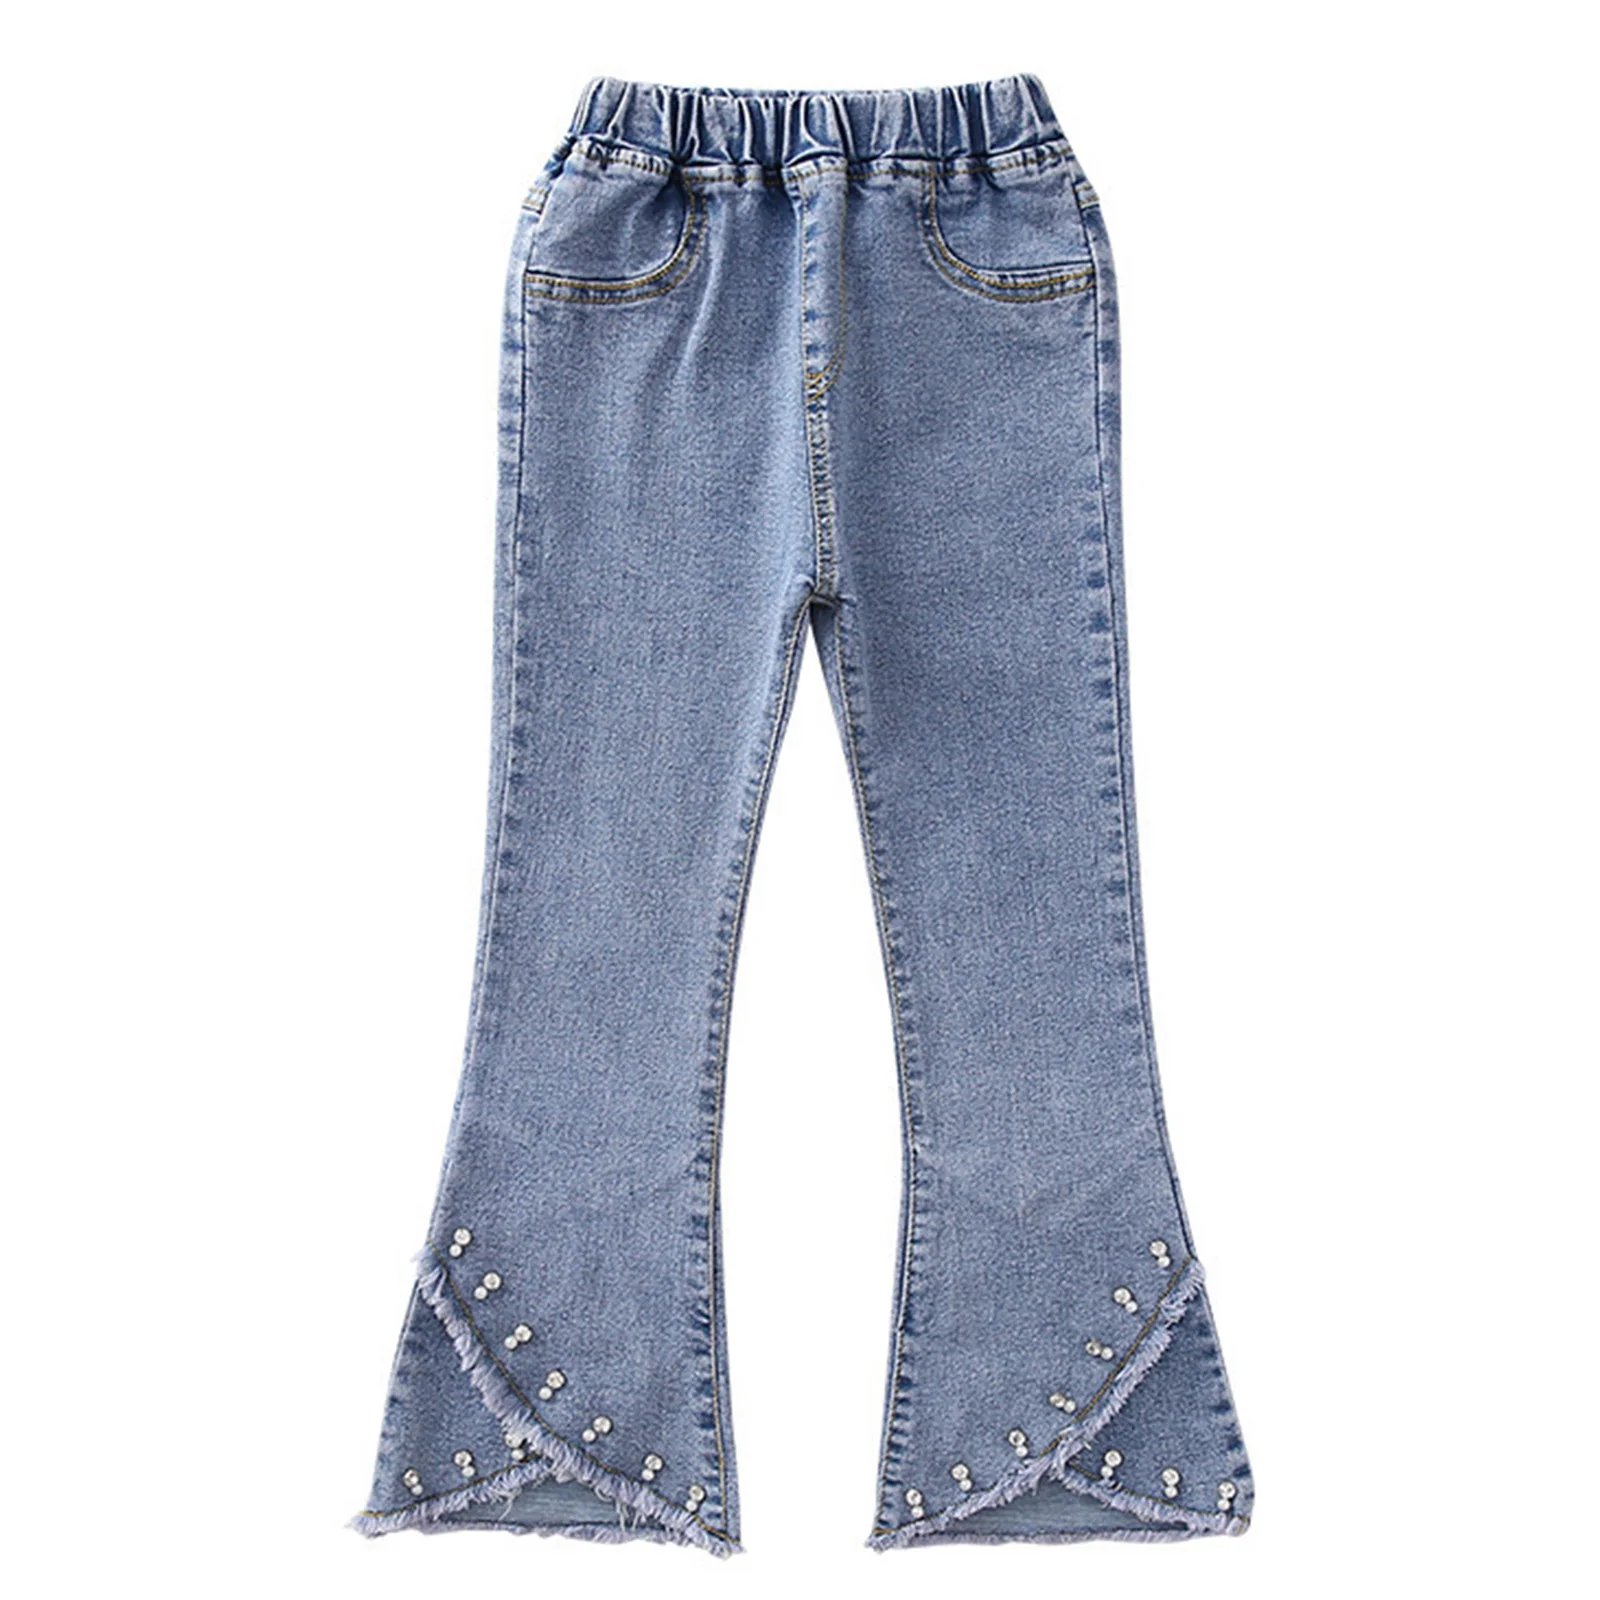 

Kids Girls Jeans Fashion Children Clothing Elastic Waist Faux Diamonds Pearls Adorned Flared Denim Pants Bell Bottoms Trousers